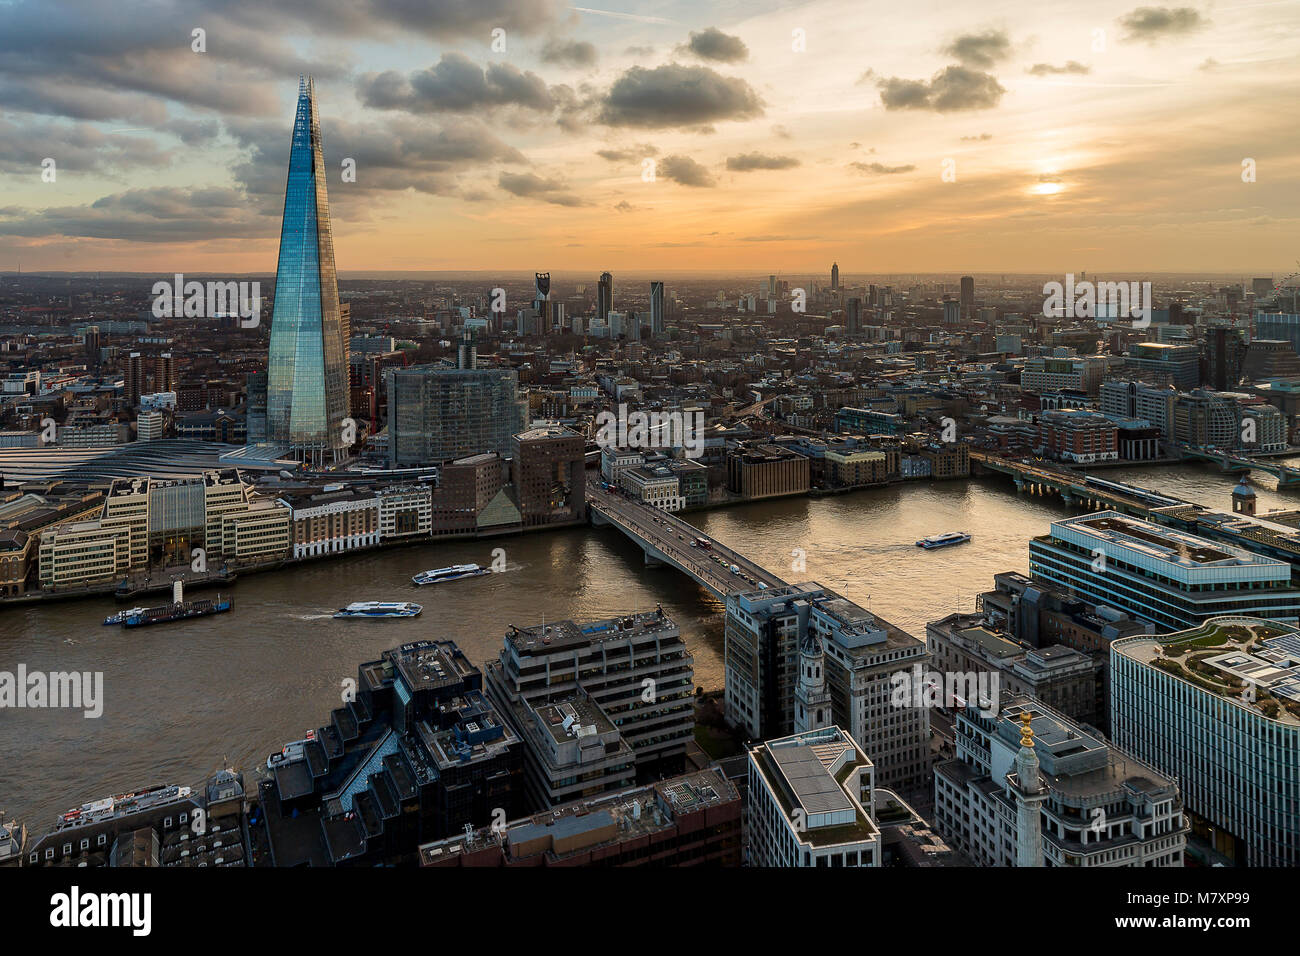 LONDON, UK – FEB 2018: Panoramic aerial view of London with the Shard skyscraper and Thames during sunset. Stock Photo